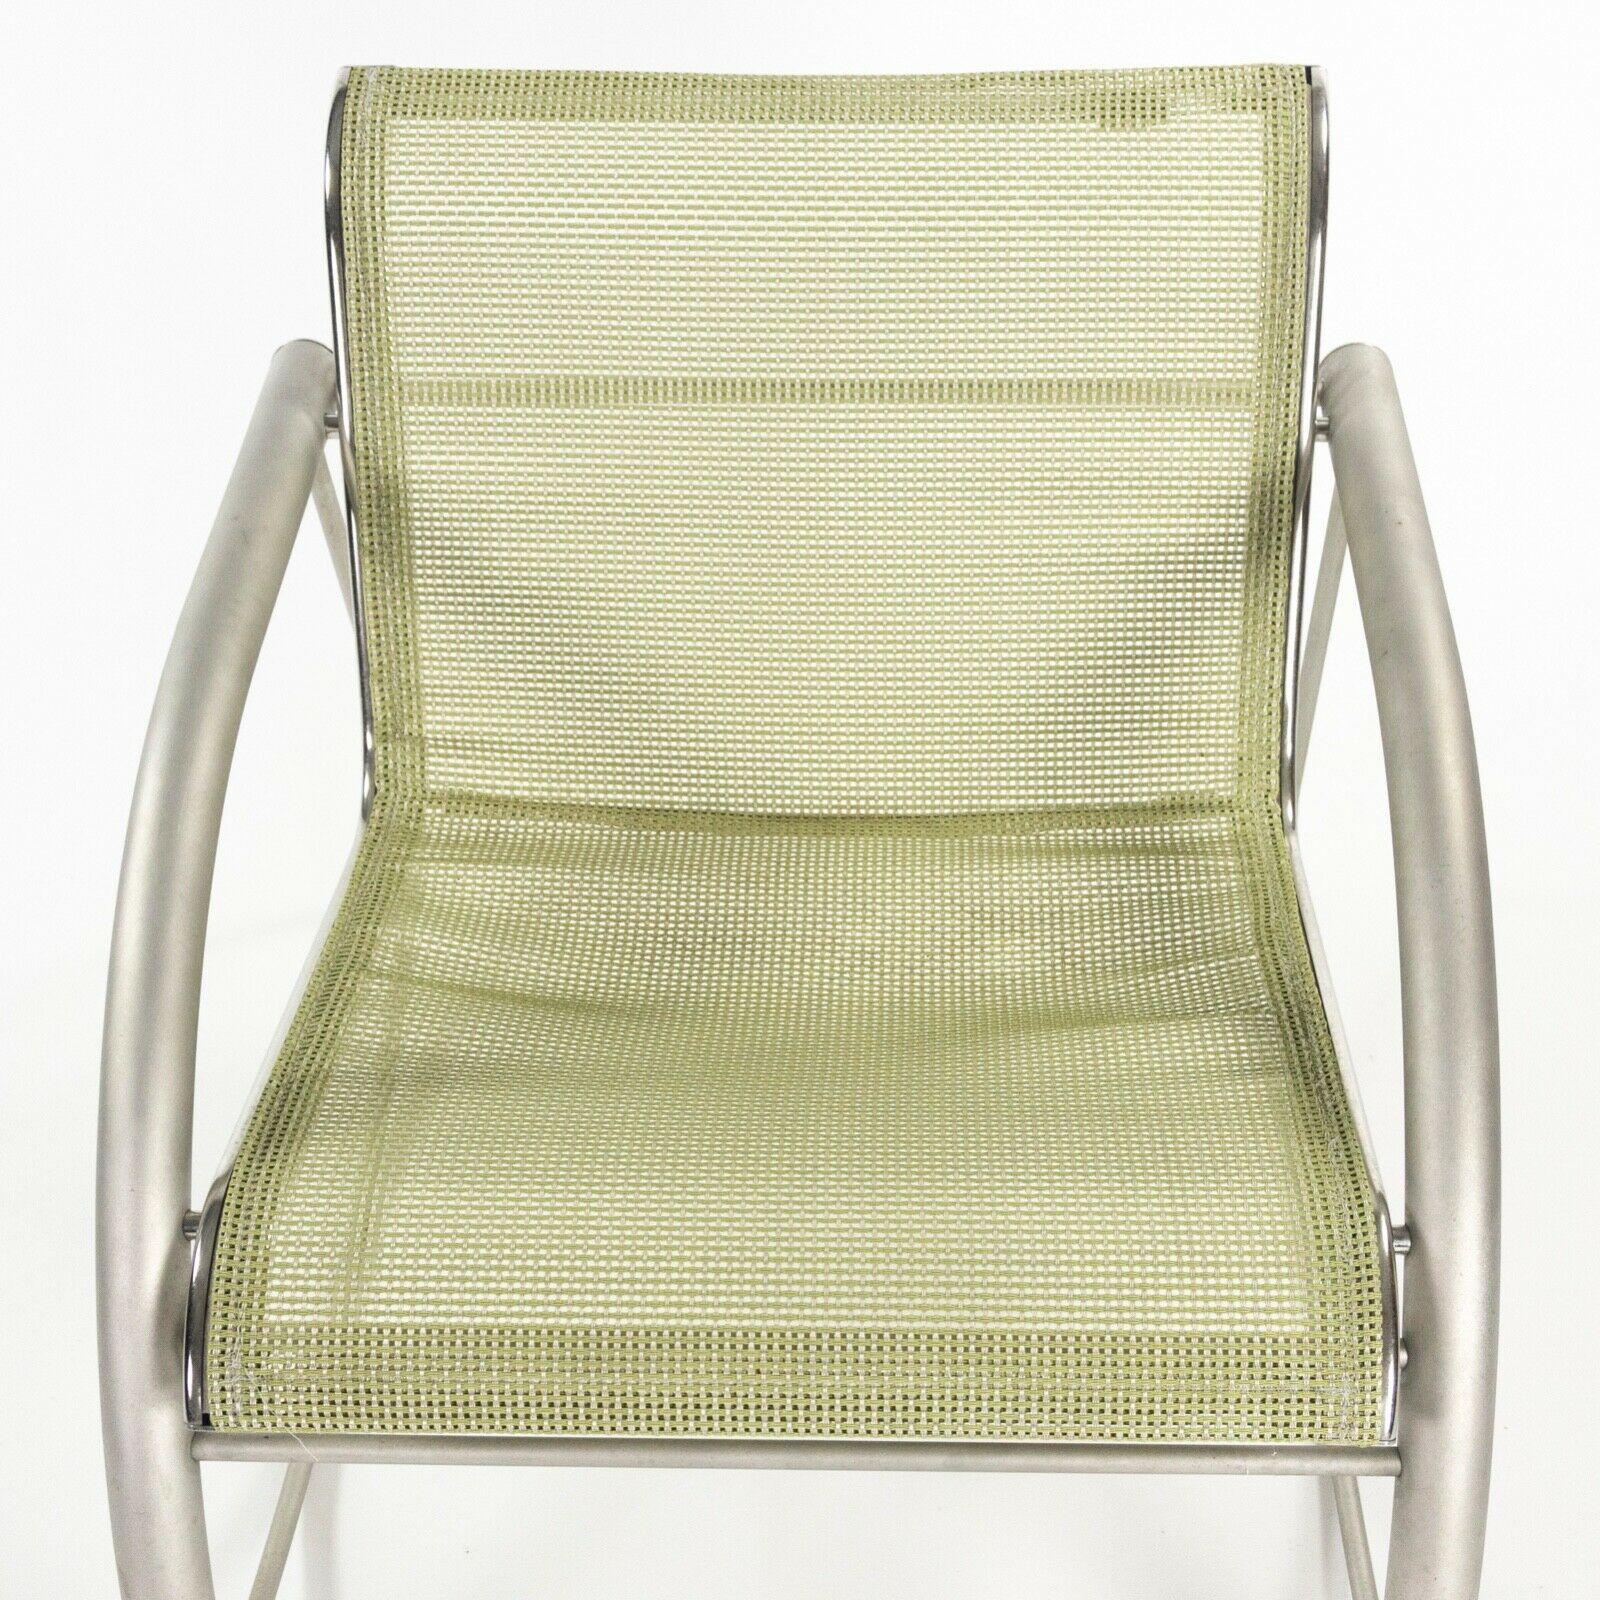 Prototype Richard Schultz 2002 Collection Stainless Steel & Mesh Rocking Chair For Sale 5